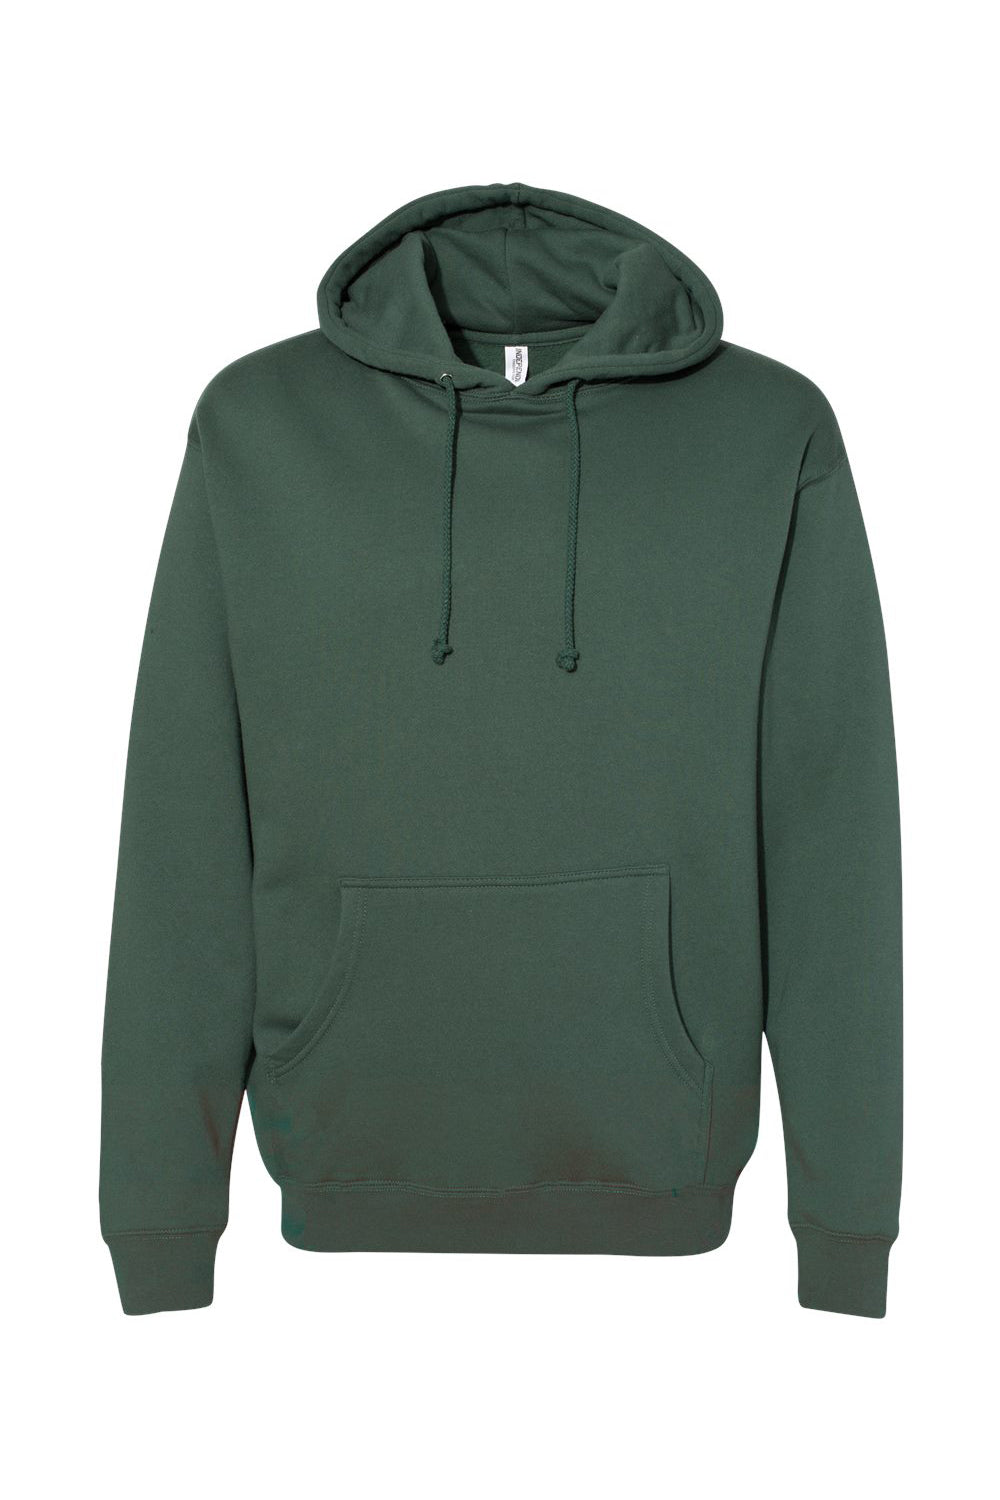 Independent Trading Co. IND4000 Mens Hooded Sweatshirt Hoodie Alpine Green Flat Front